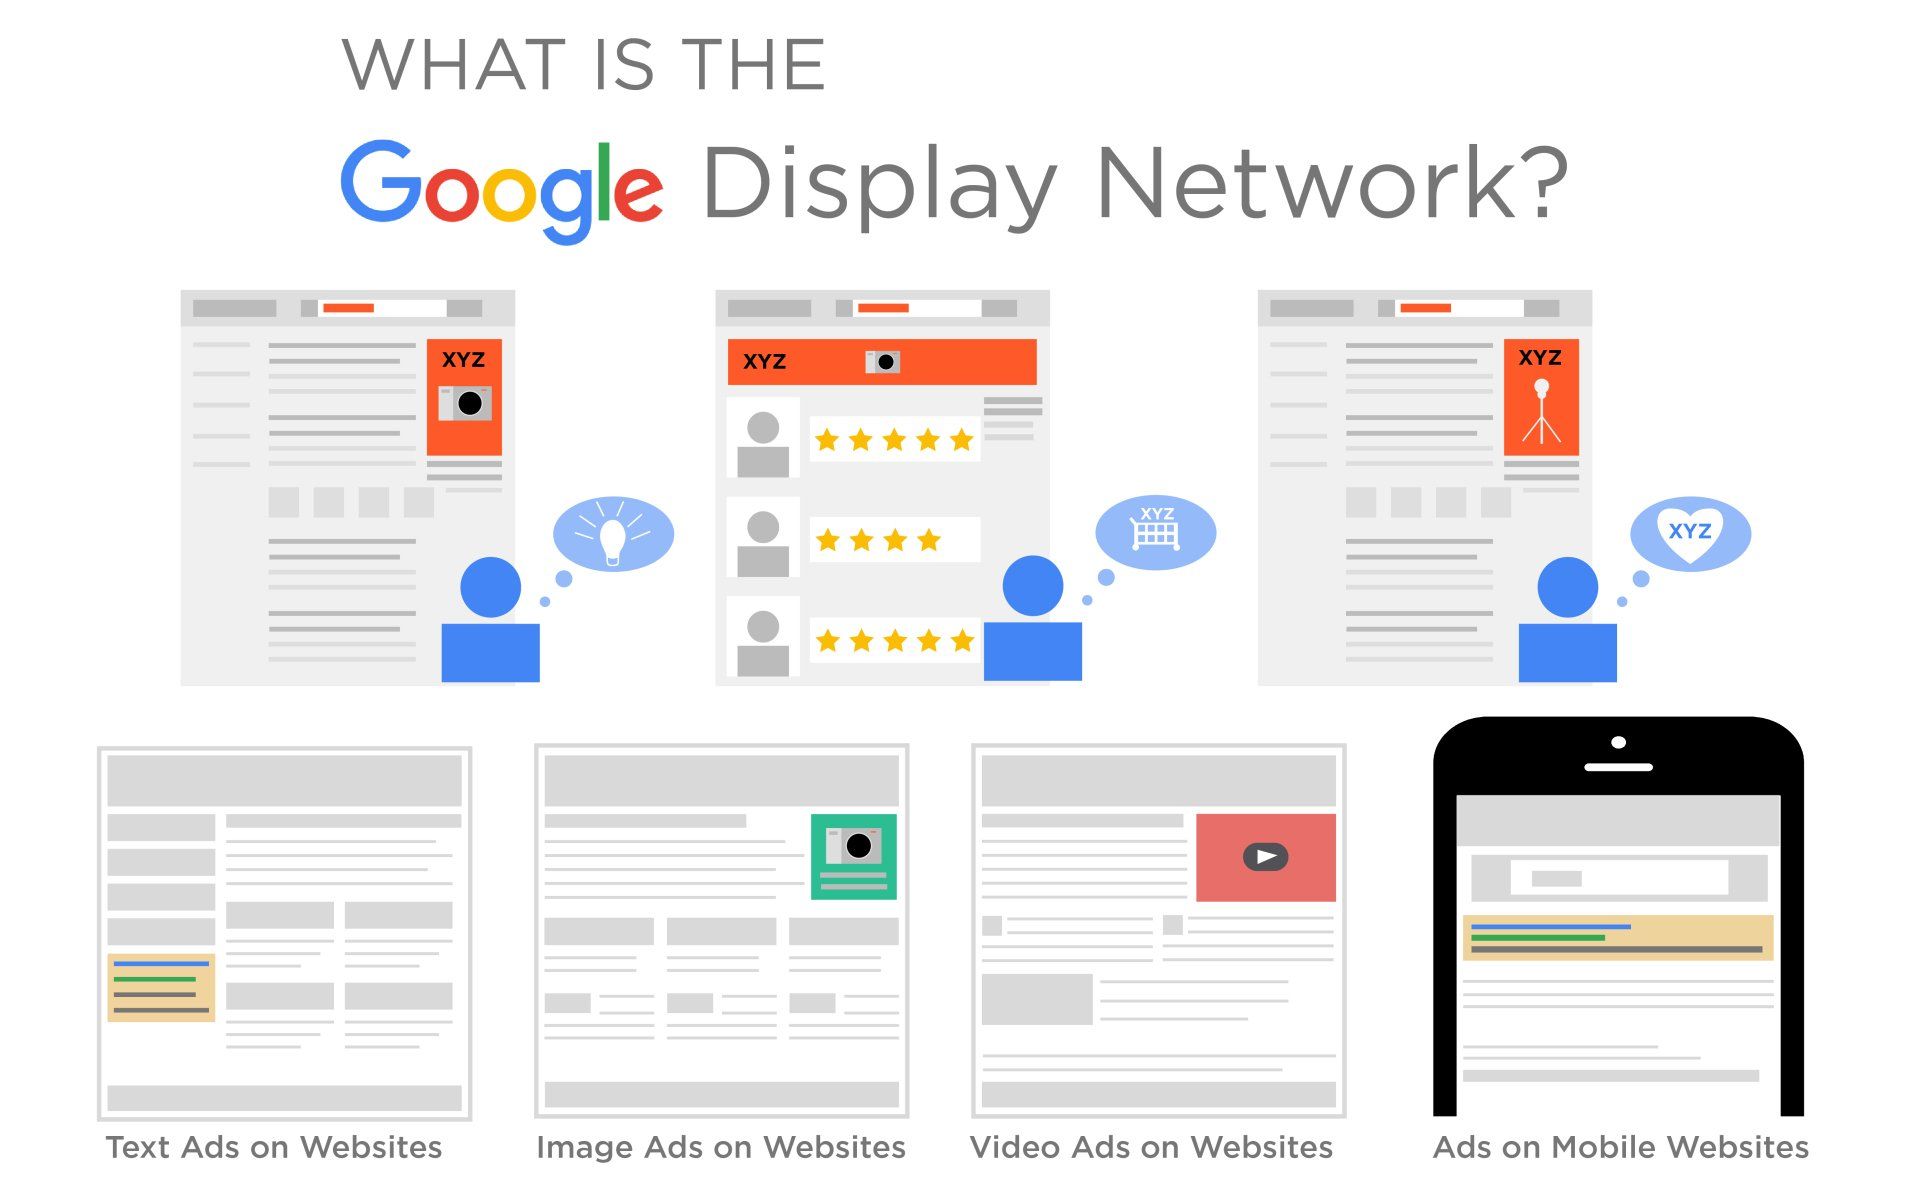 What is the Google Display Network?